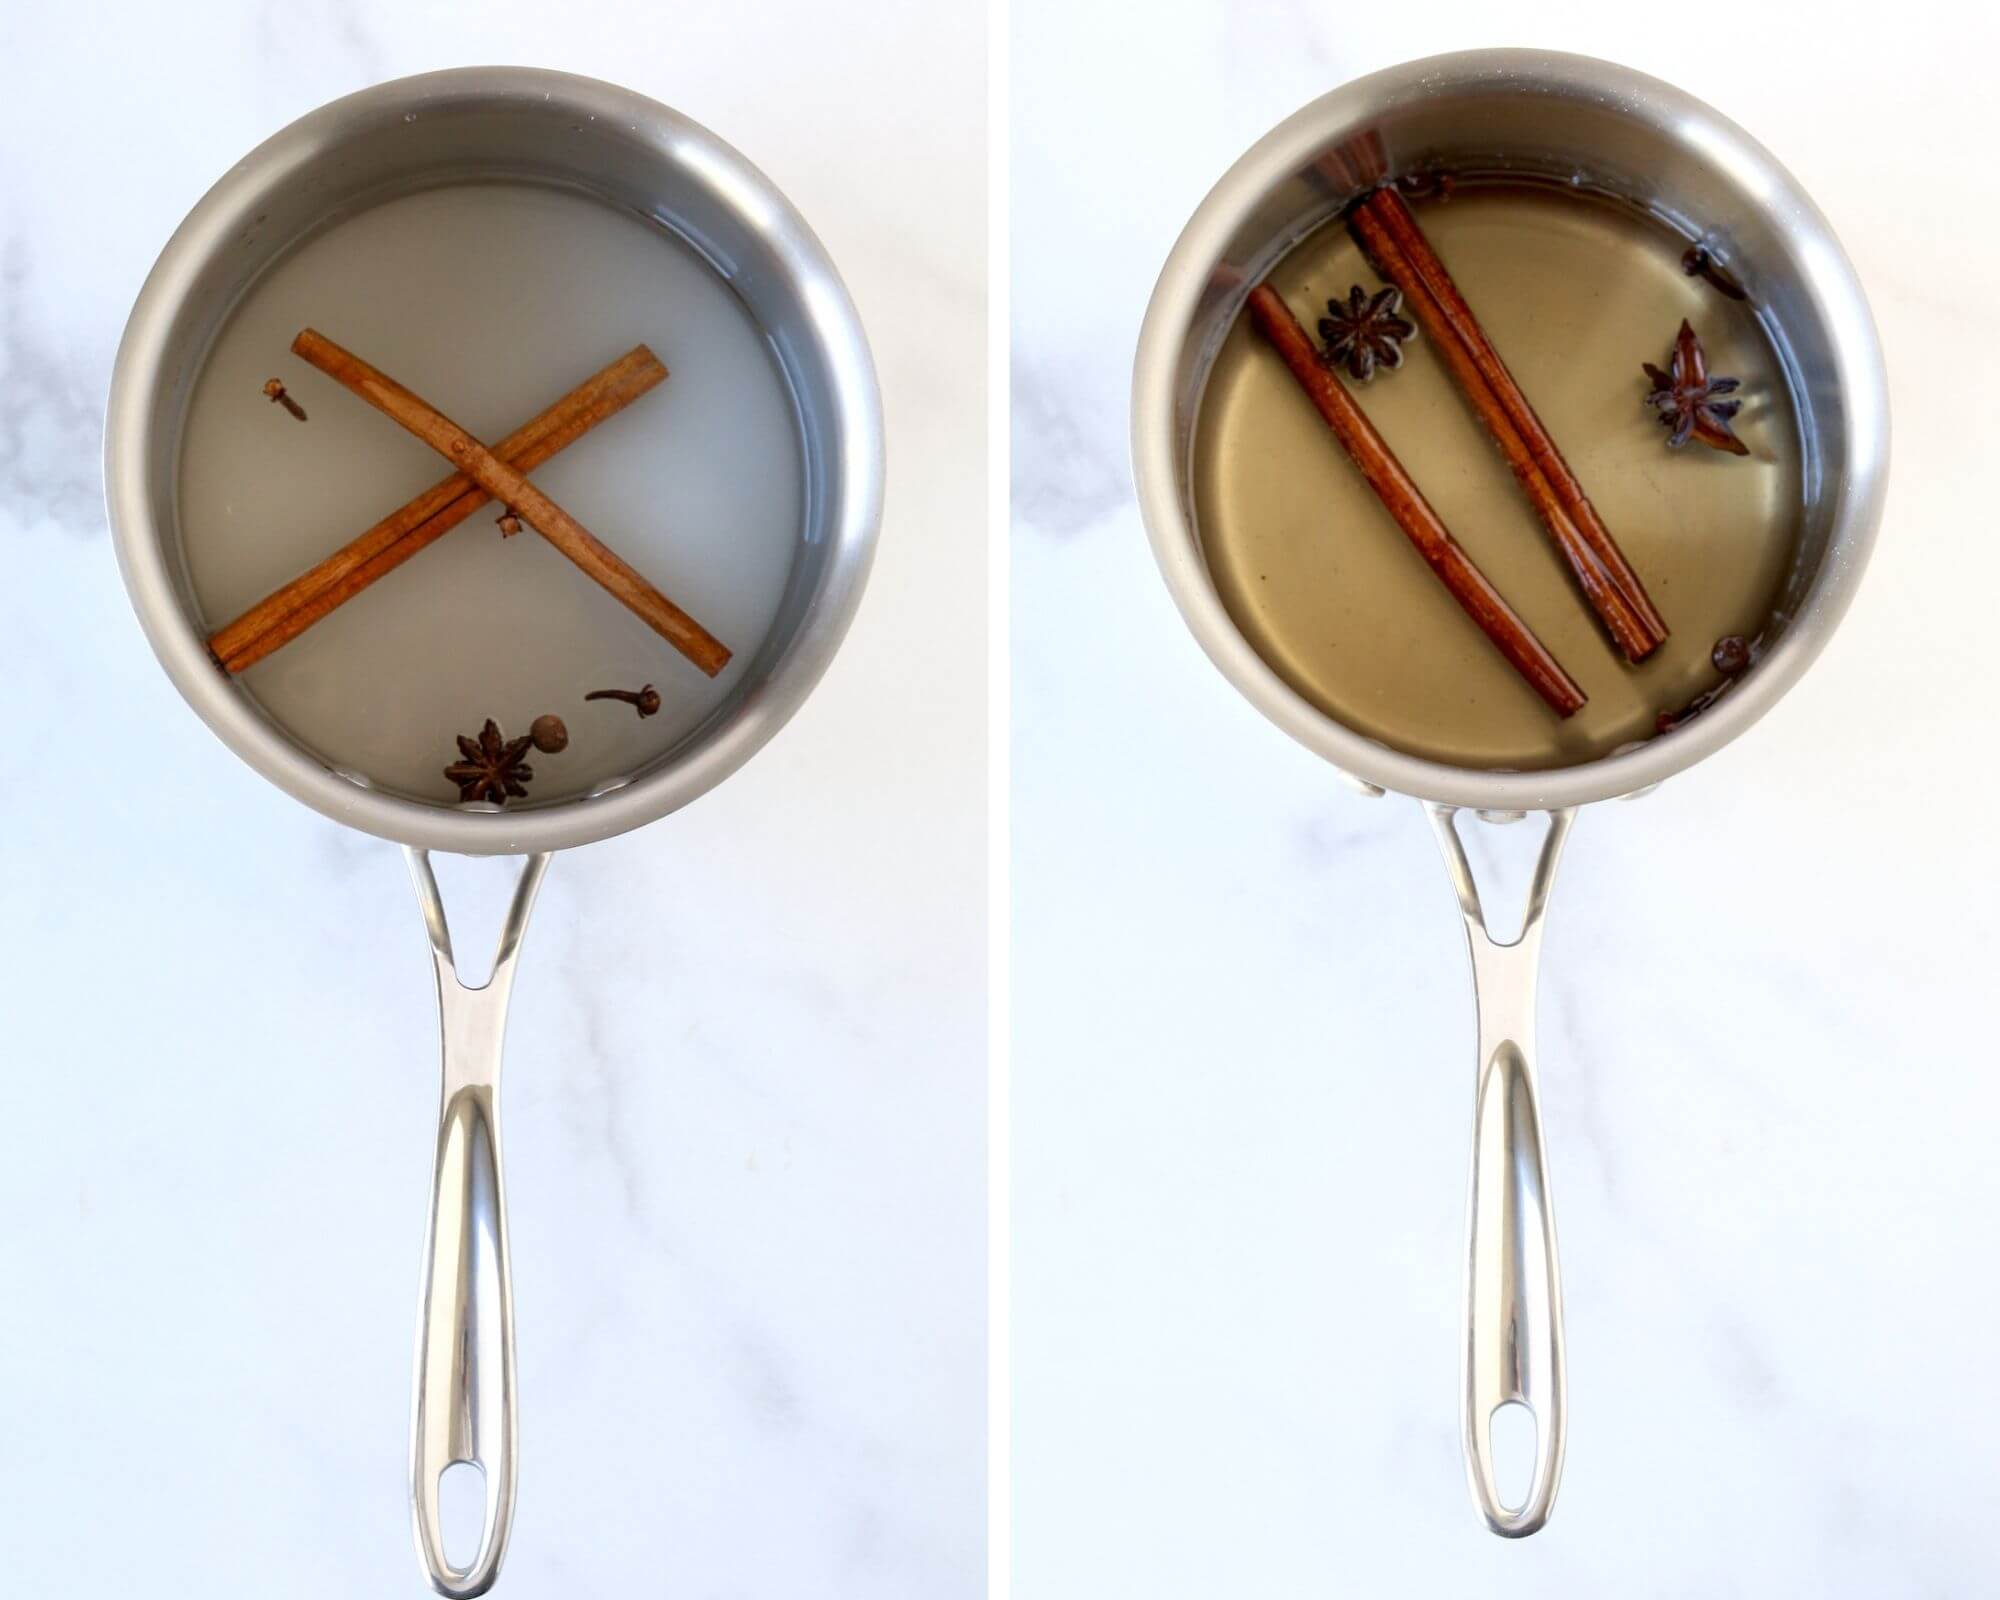 A small saucepan with granulated sugar, water, cinnamon sticks, anise and allspice.